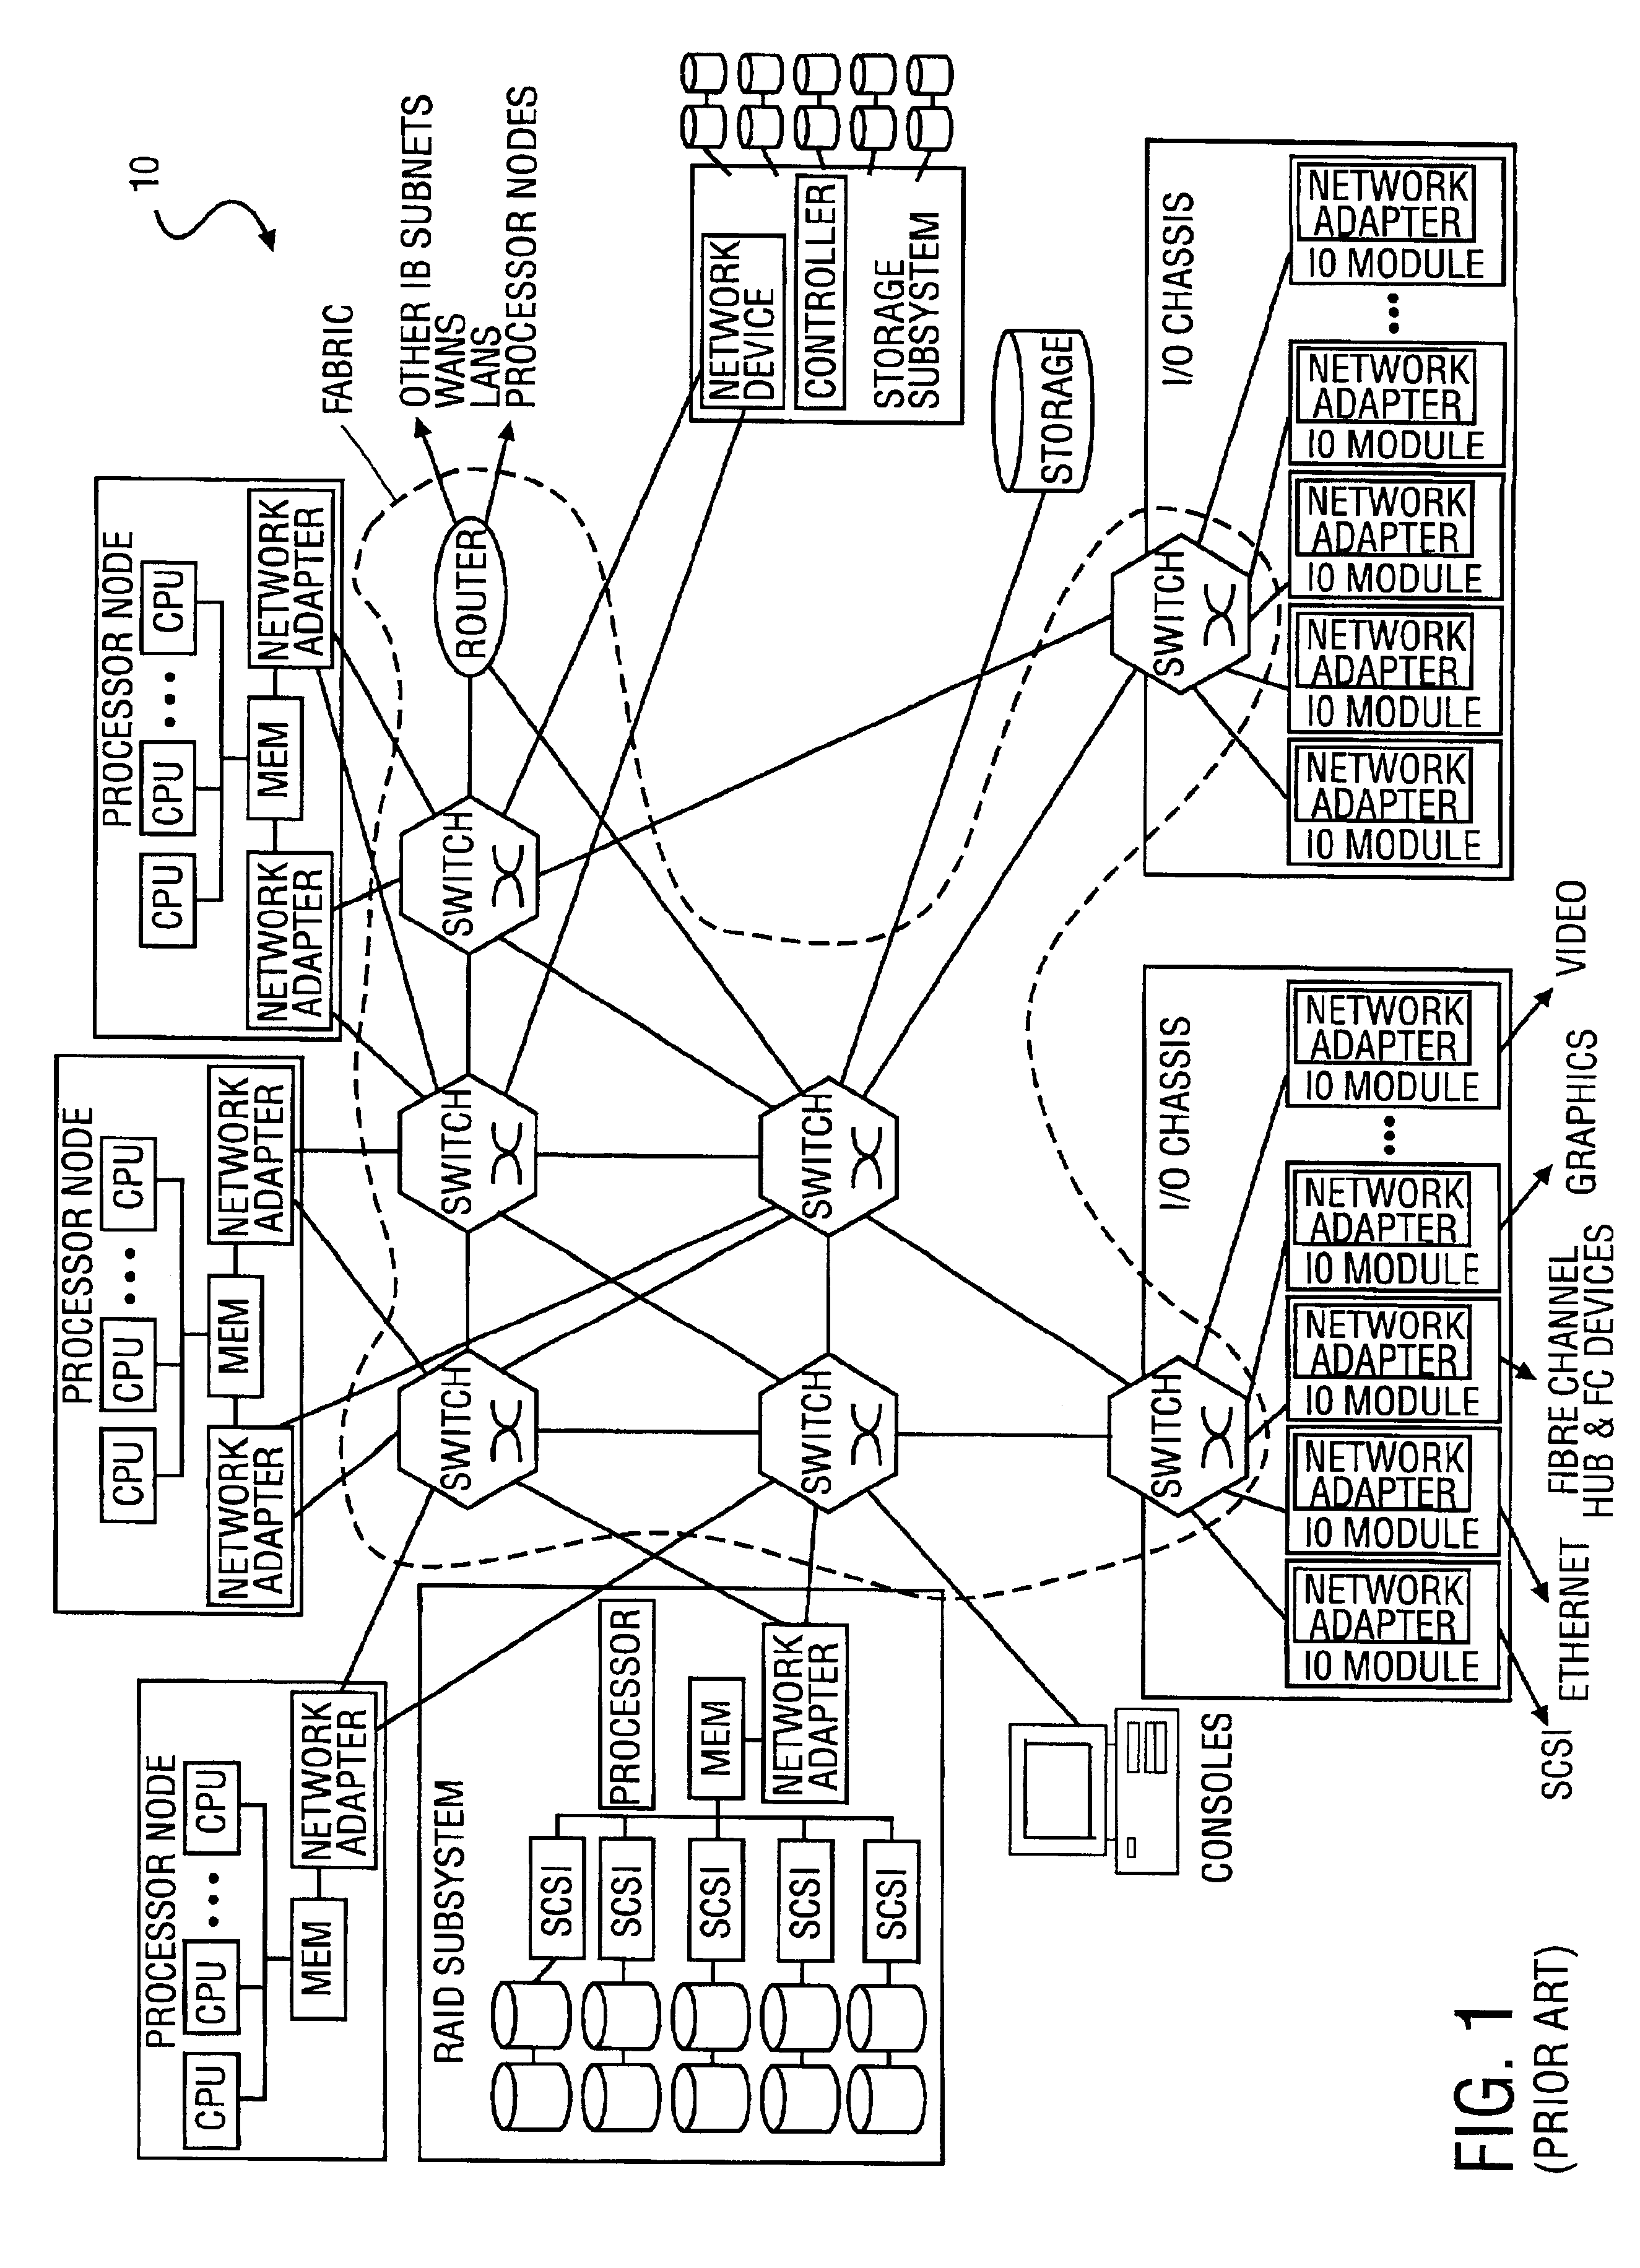 Speculative loading of buffers within a port of a network device